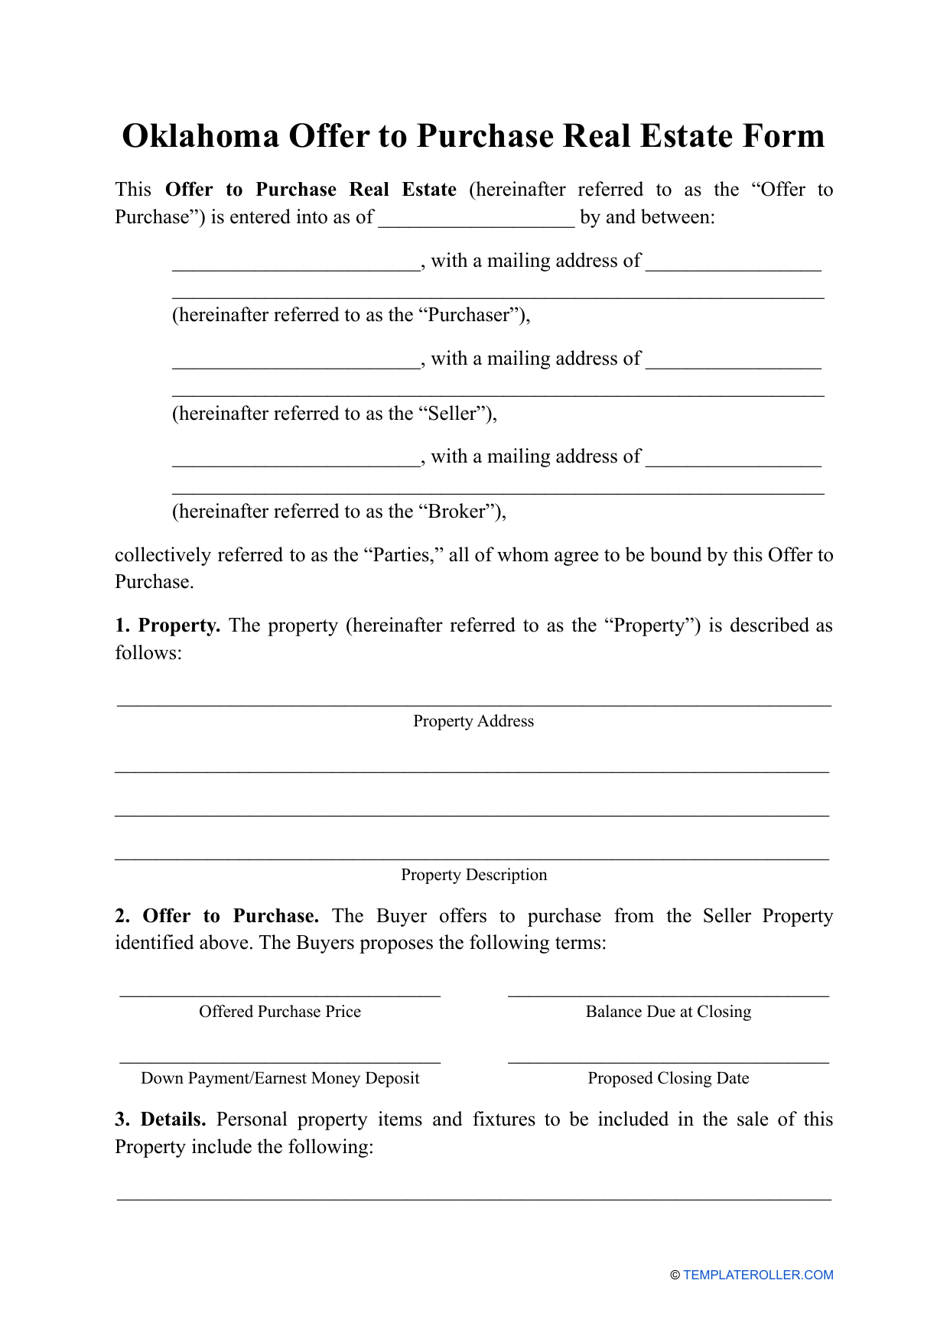 Offer to Purchase Real Estate Form - Oklahoma, Page 1